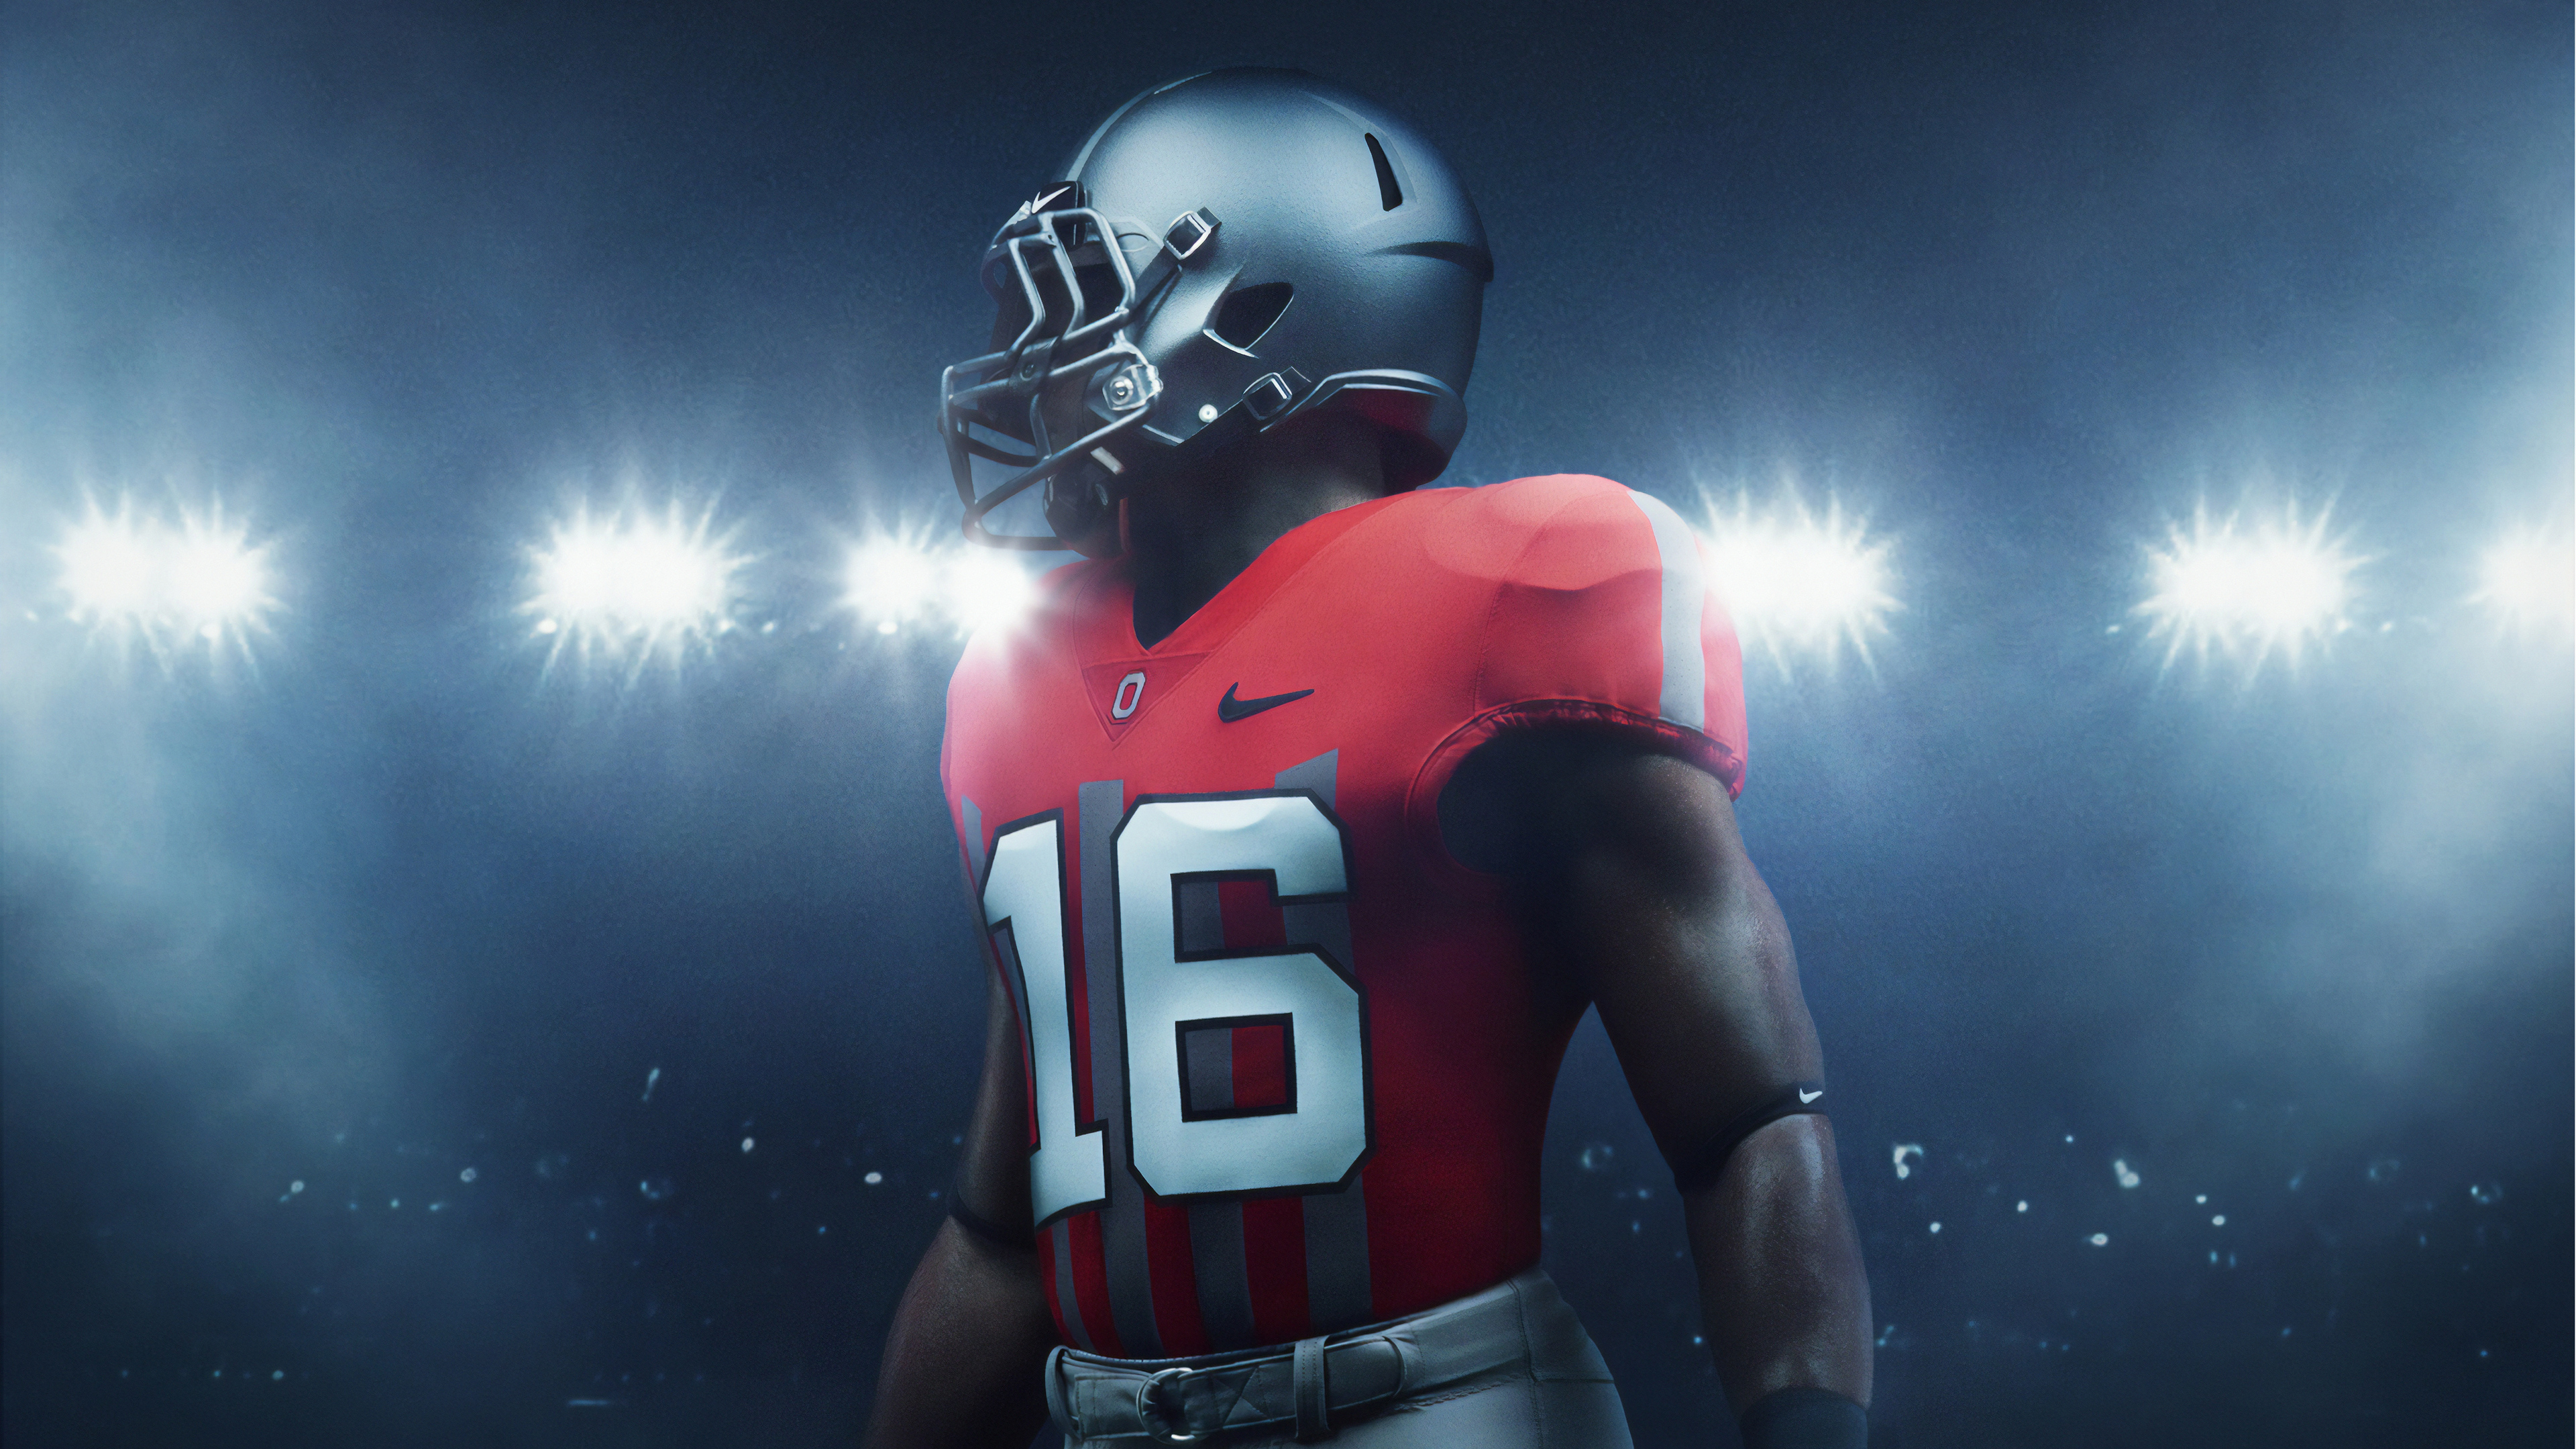 Nike Football Player, HD Sports, 4k Wallpapers, Images ...